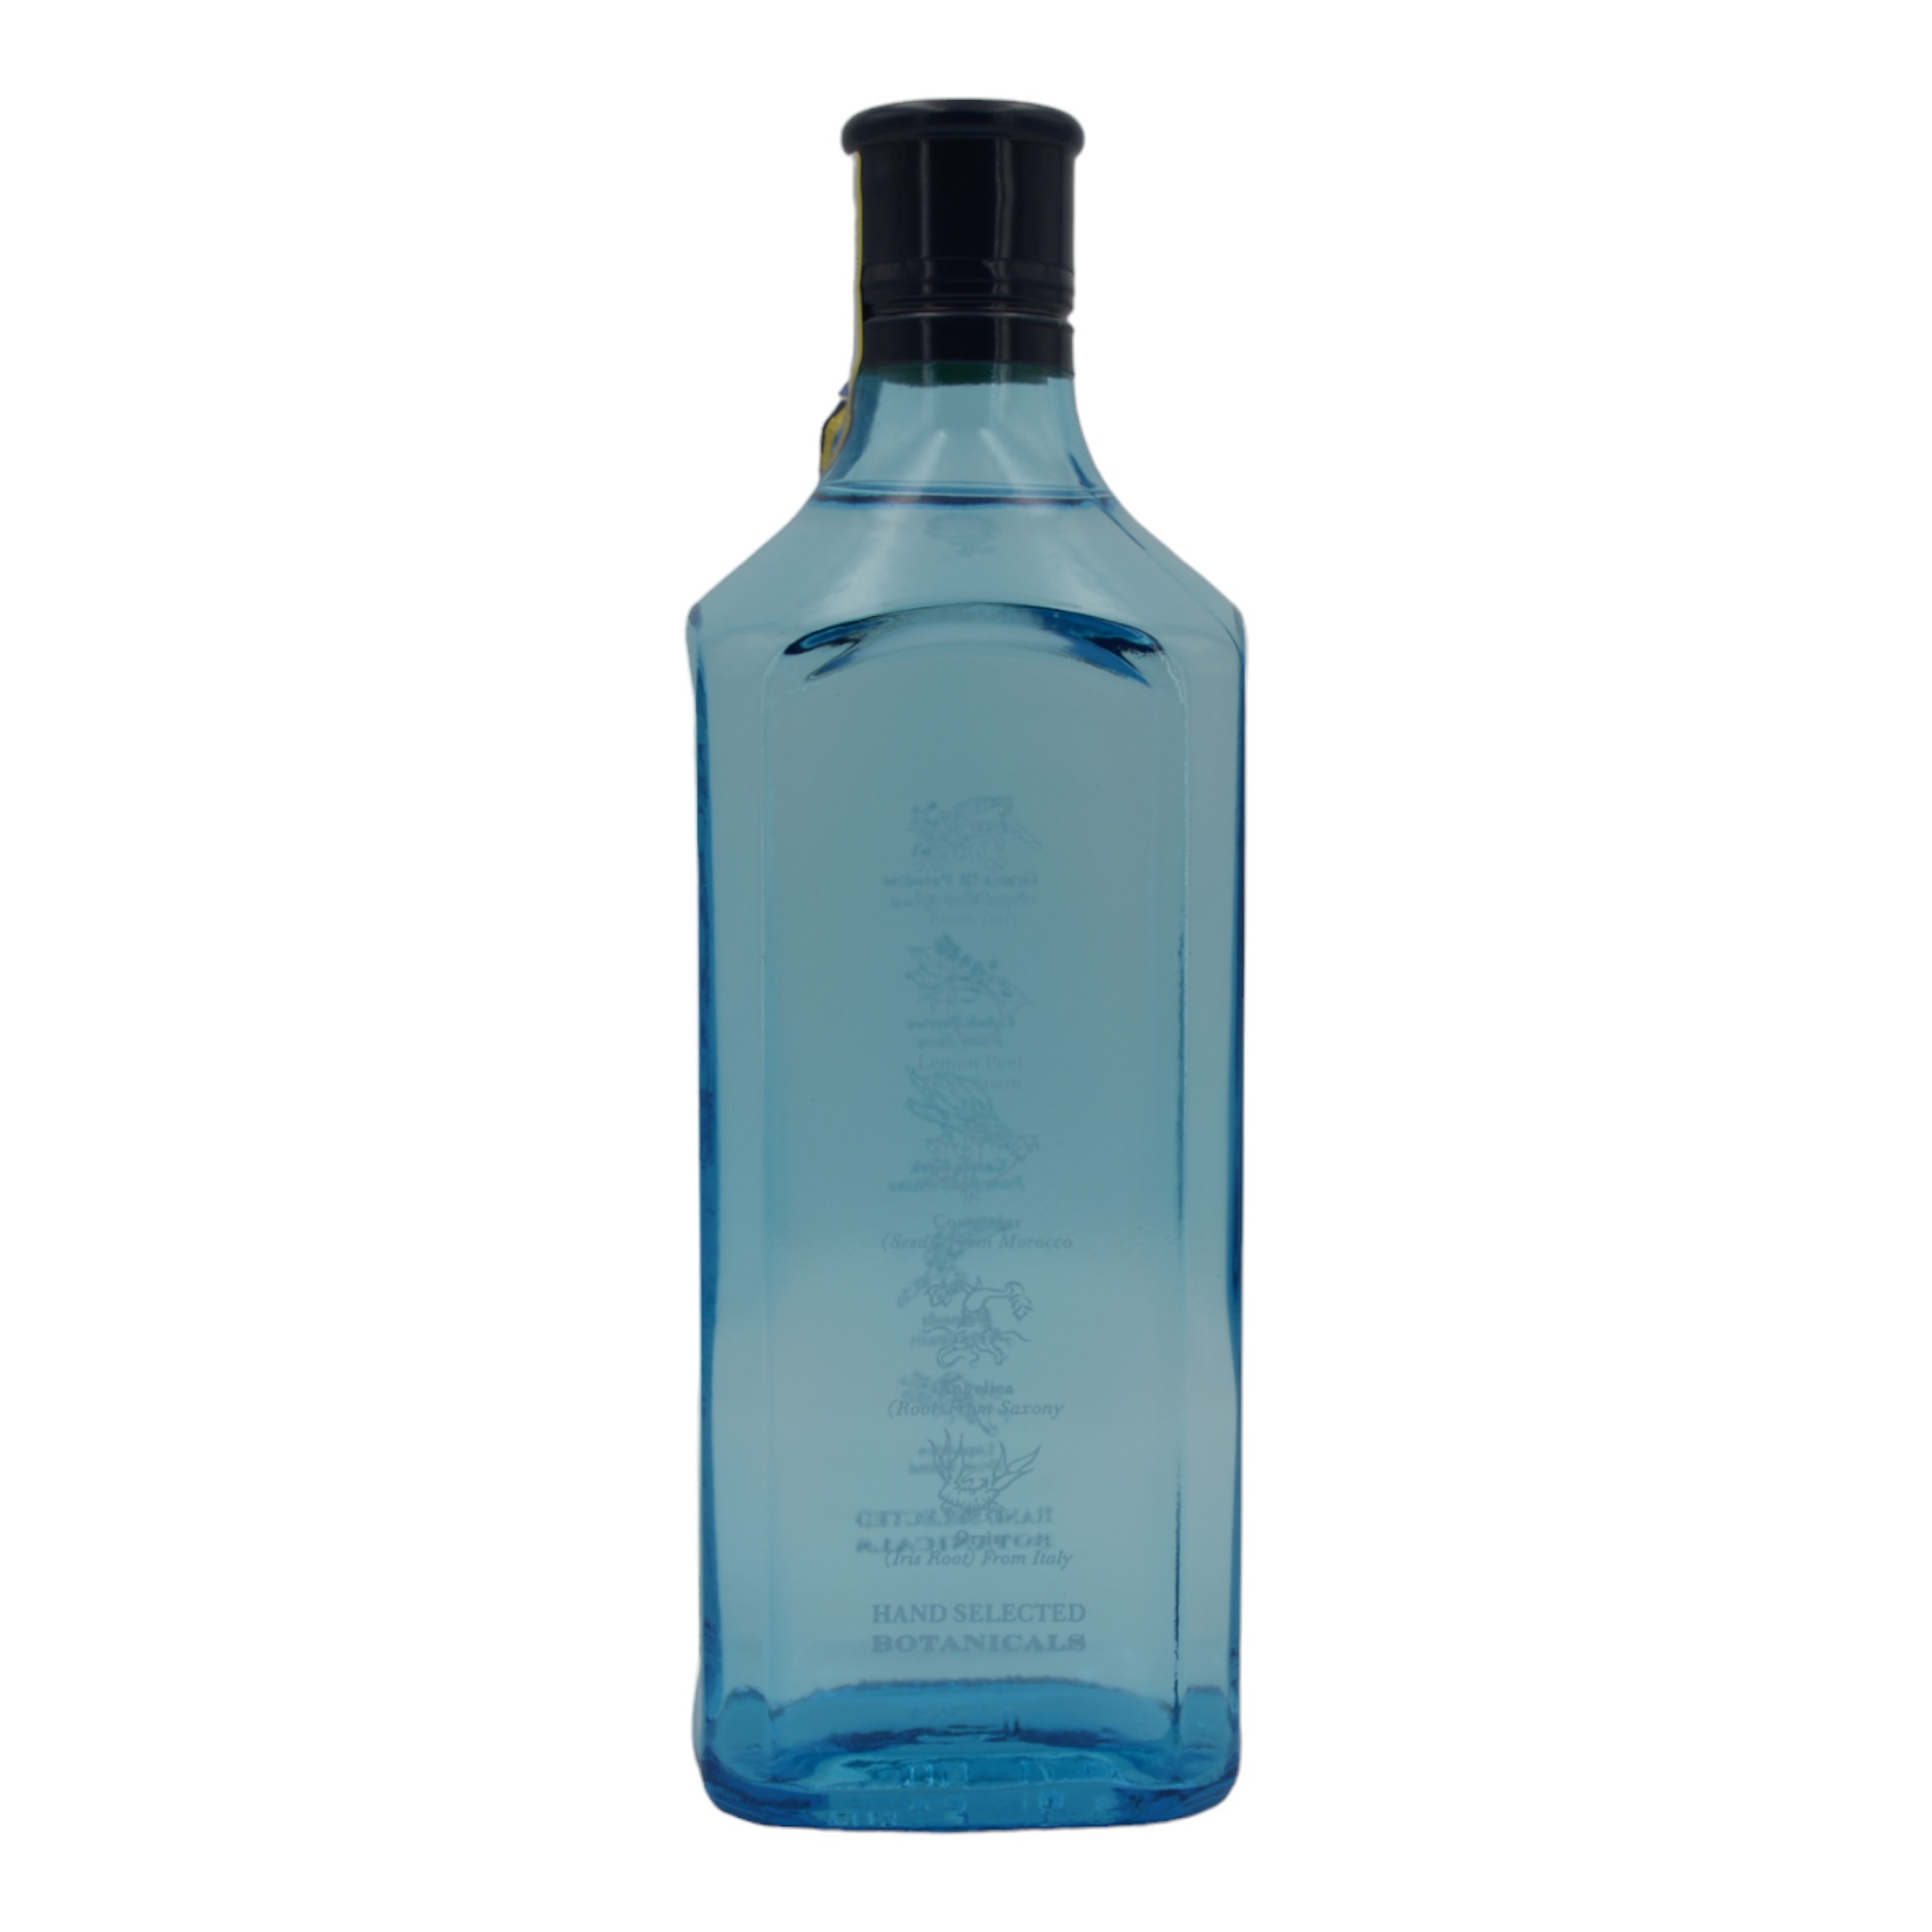 5010677714006Bombay Sapphire London Dry Gin Vapour infused s1 - Weinhaus-Buecker